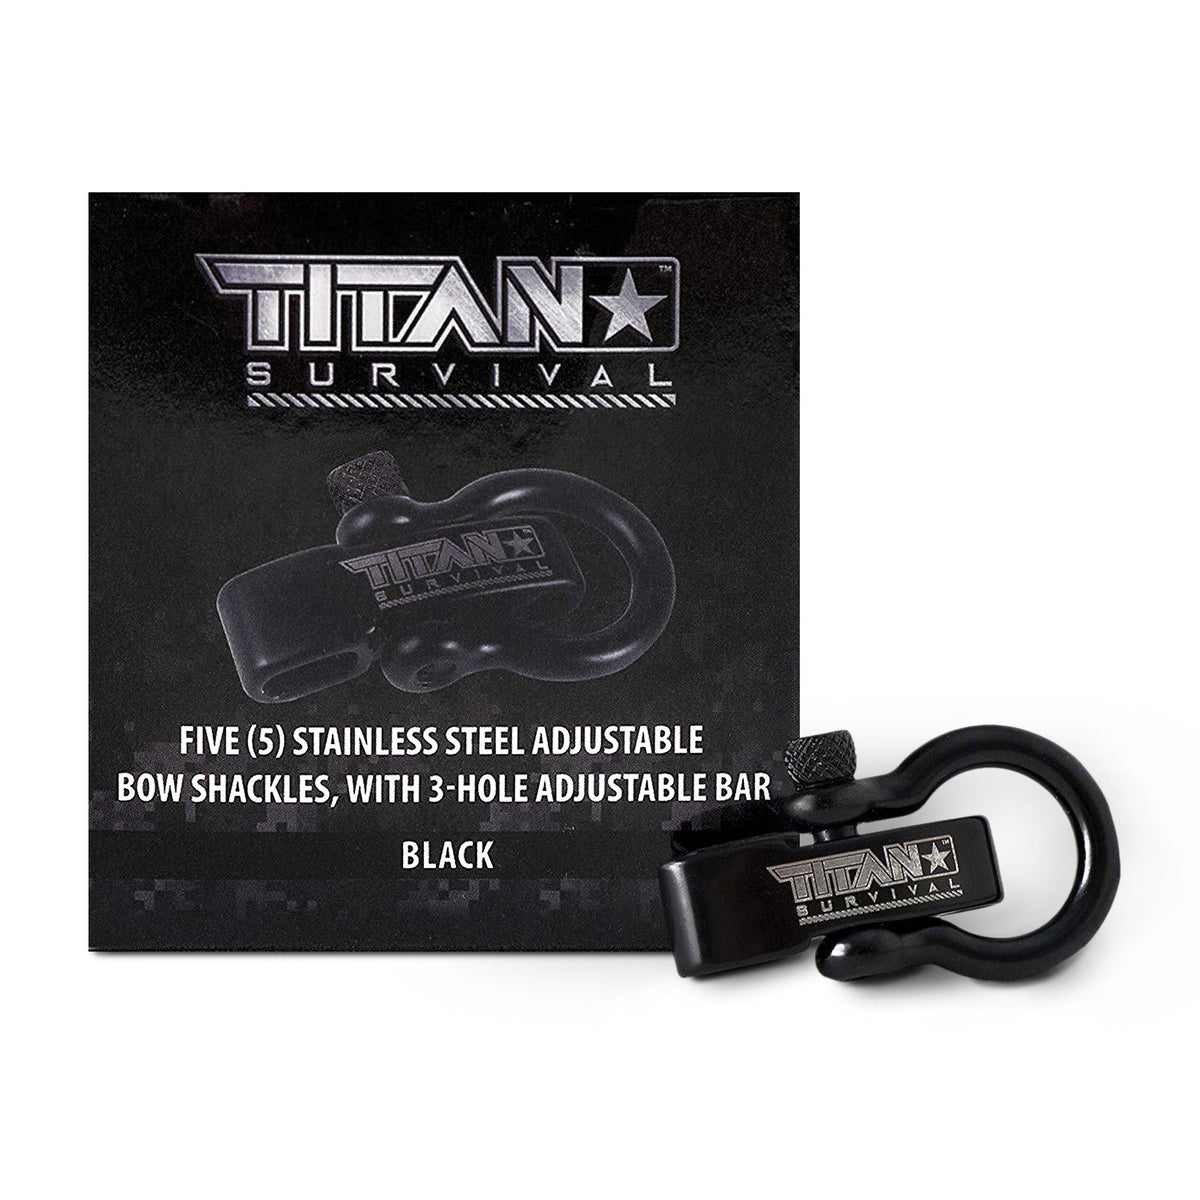 Stainless Steel Bow Shackles - TITAN Survival